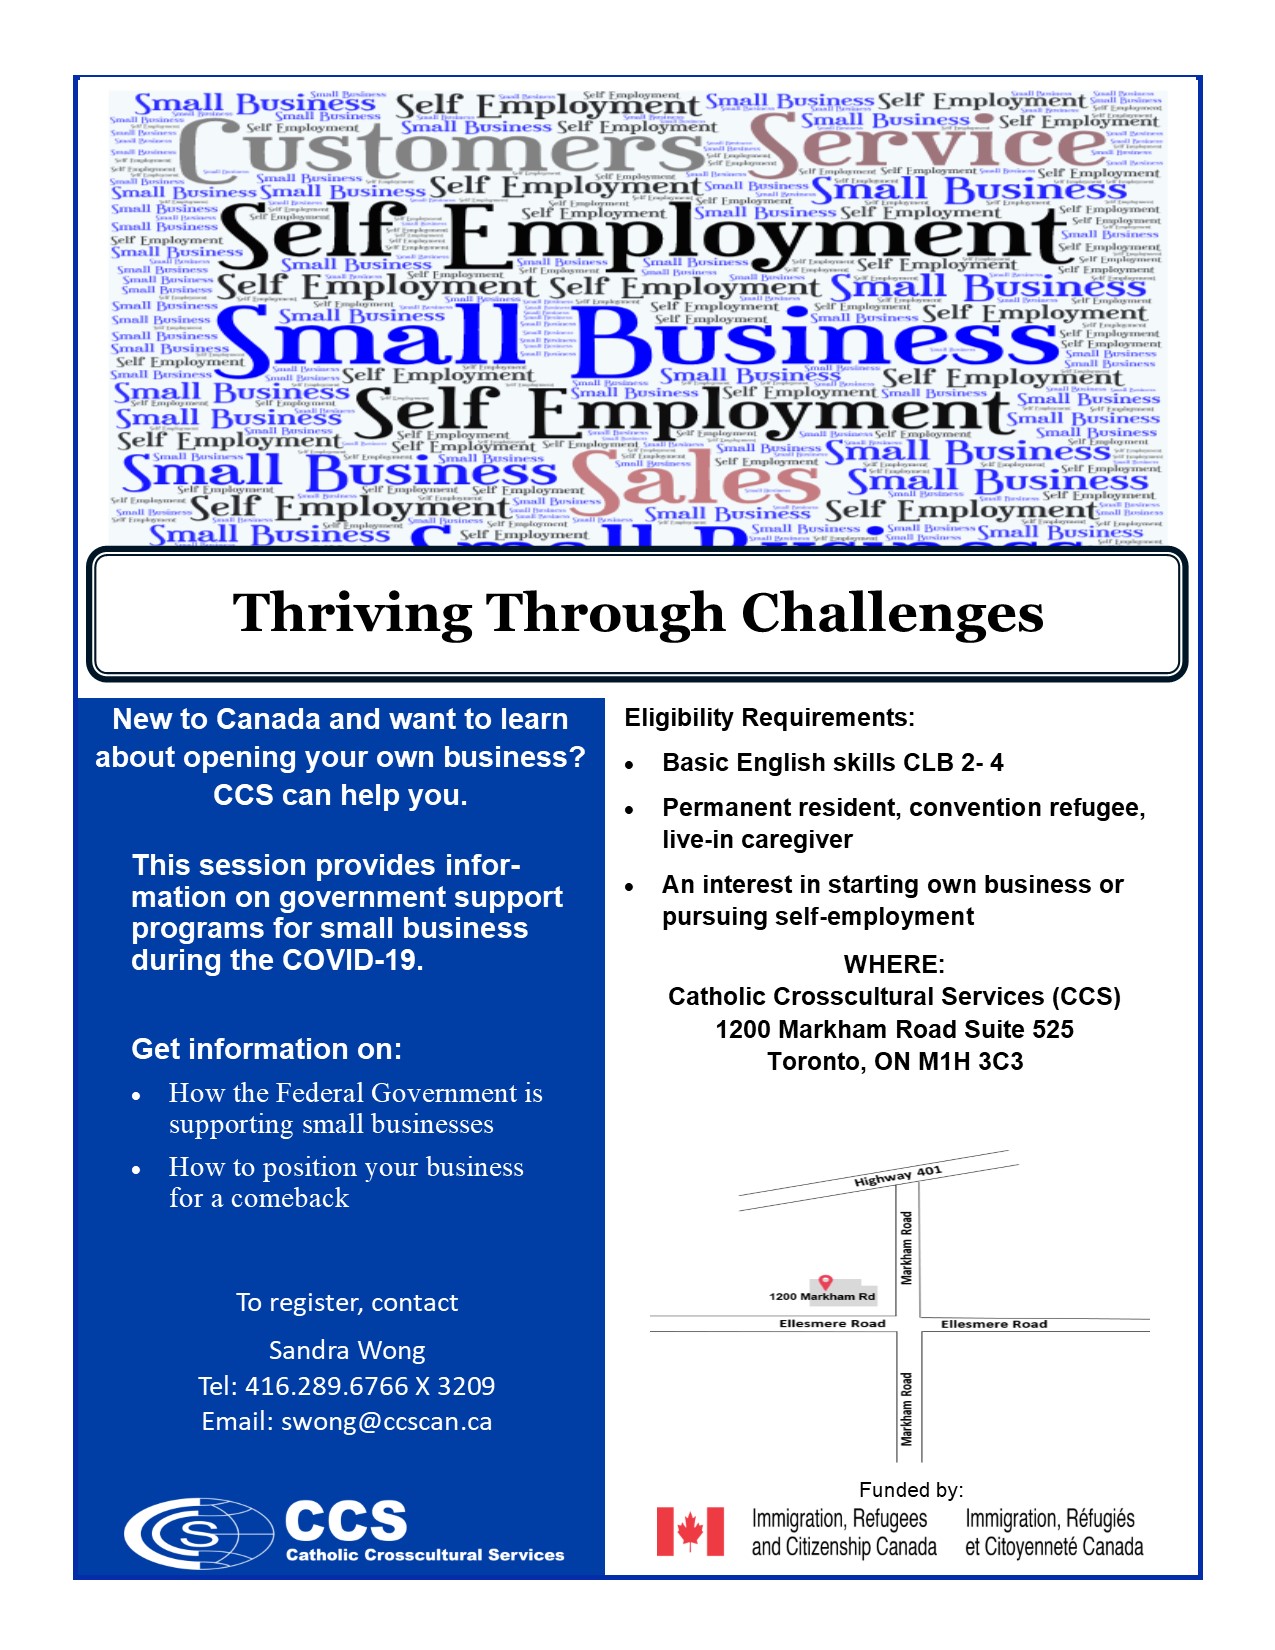 Thriving Through Challenges flyer